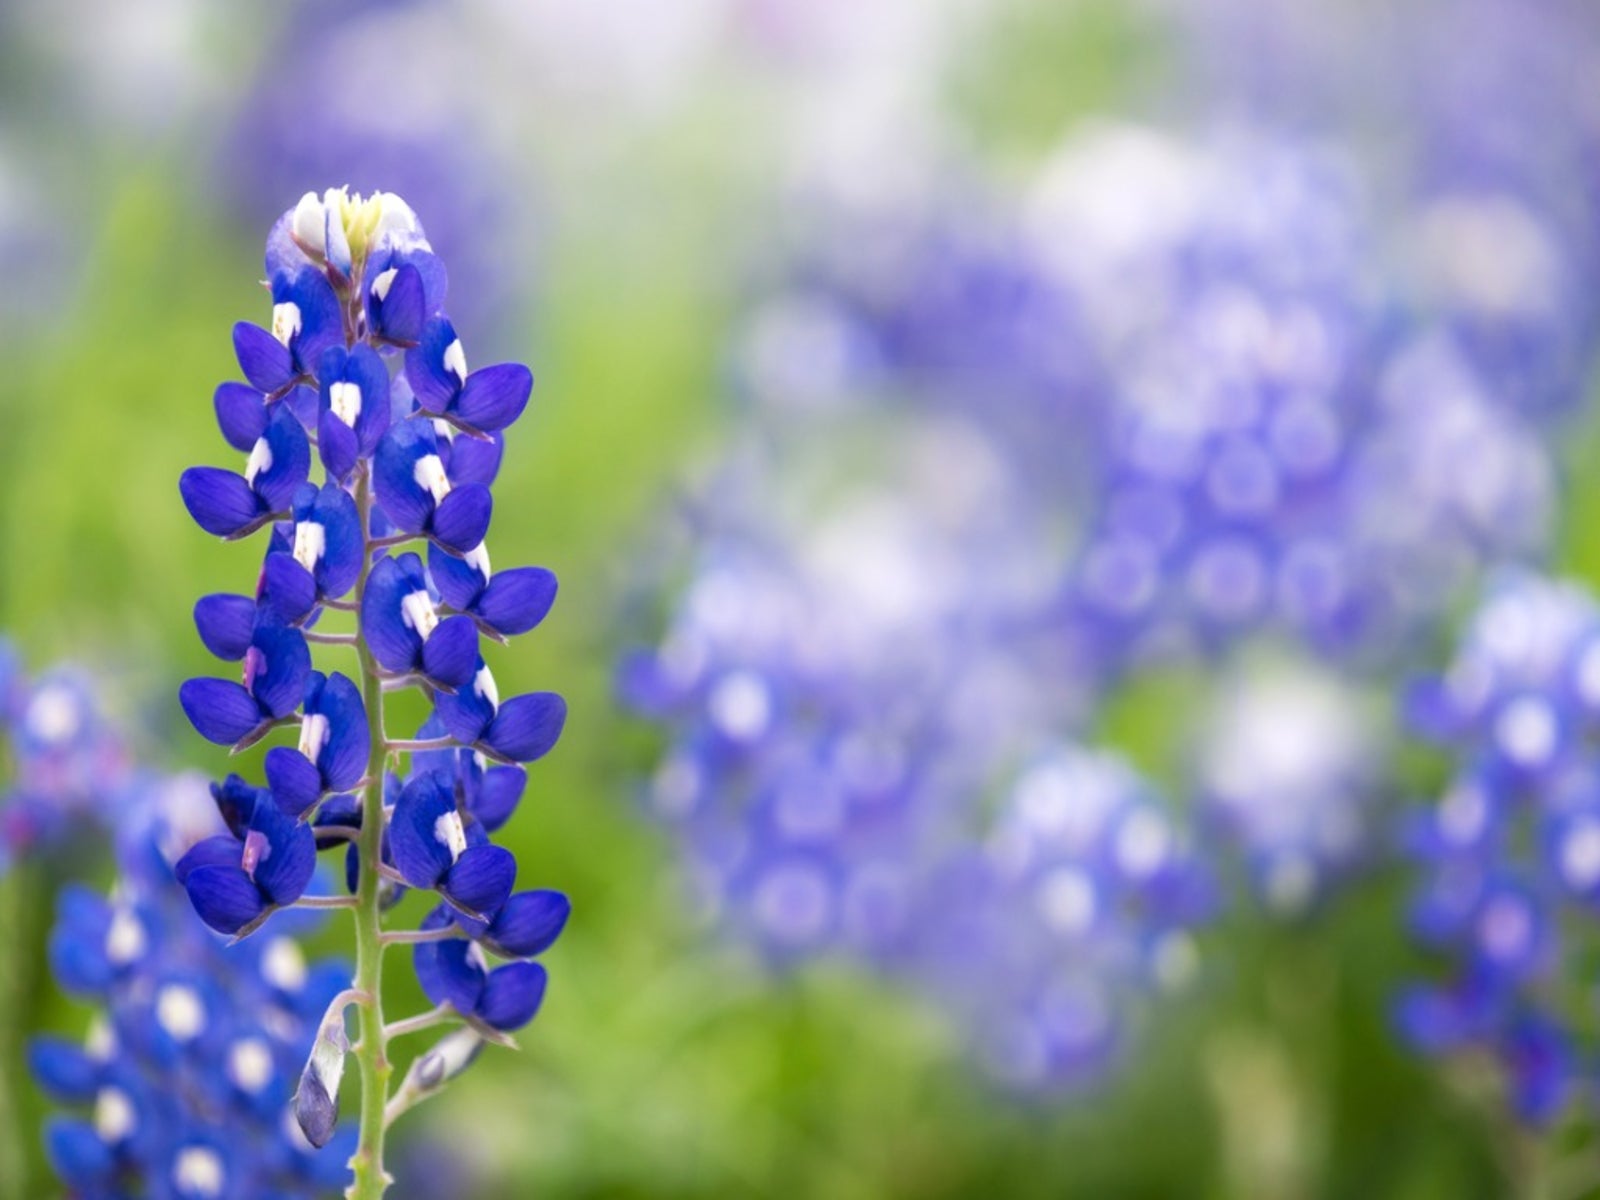 How to grow blue bonnets – tips for raising the Texan State flower